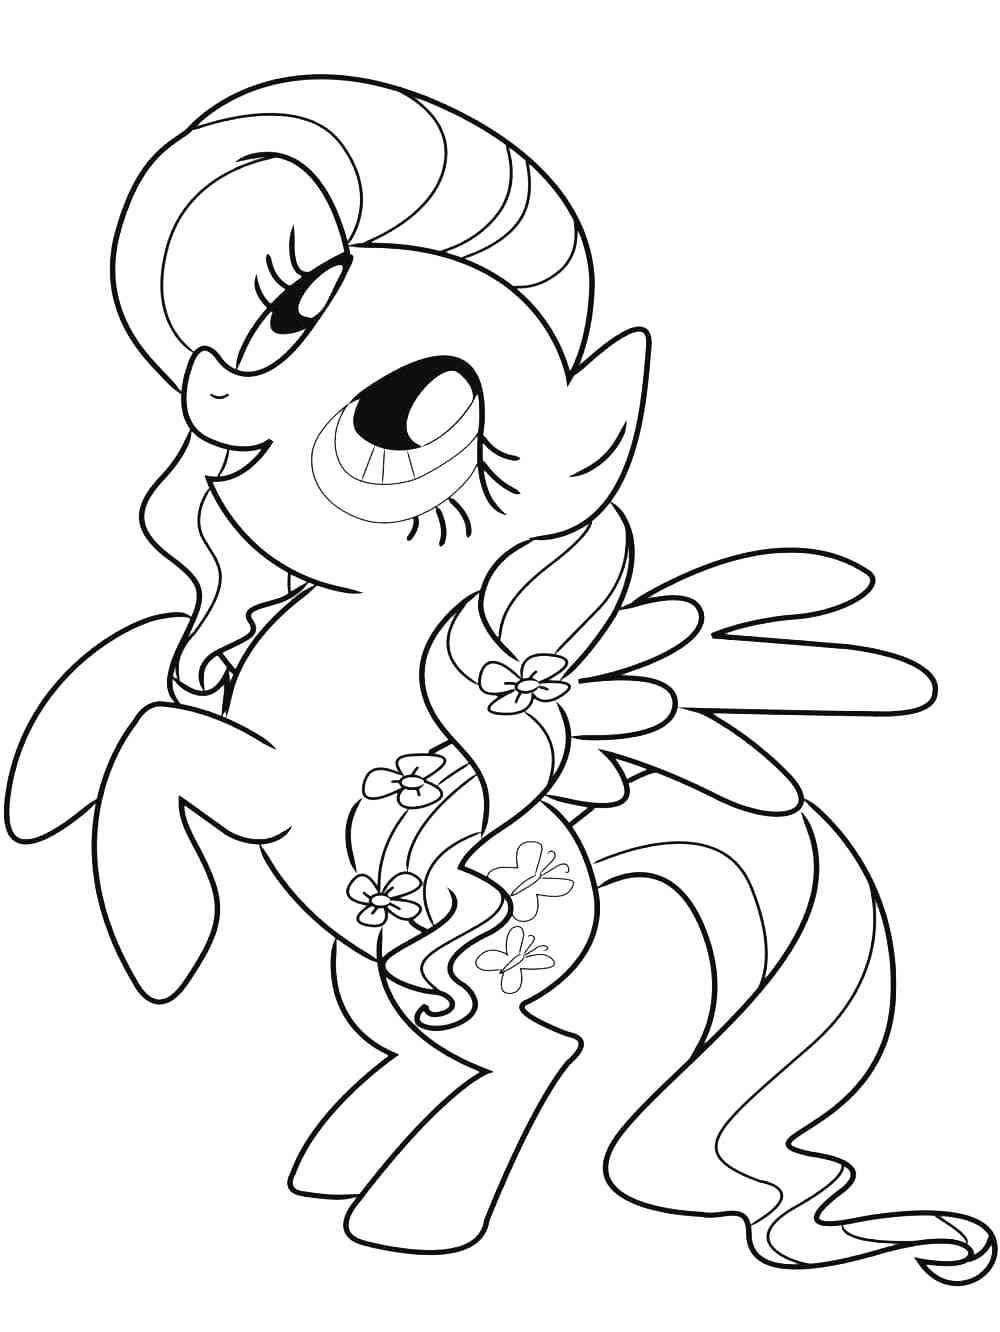 Fluttershy 17 coloring page